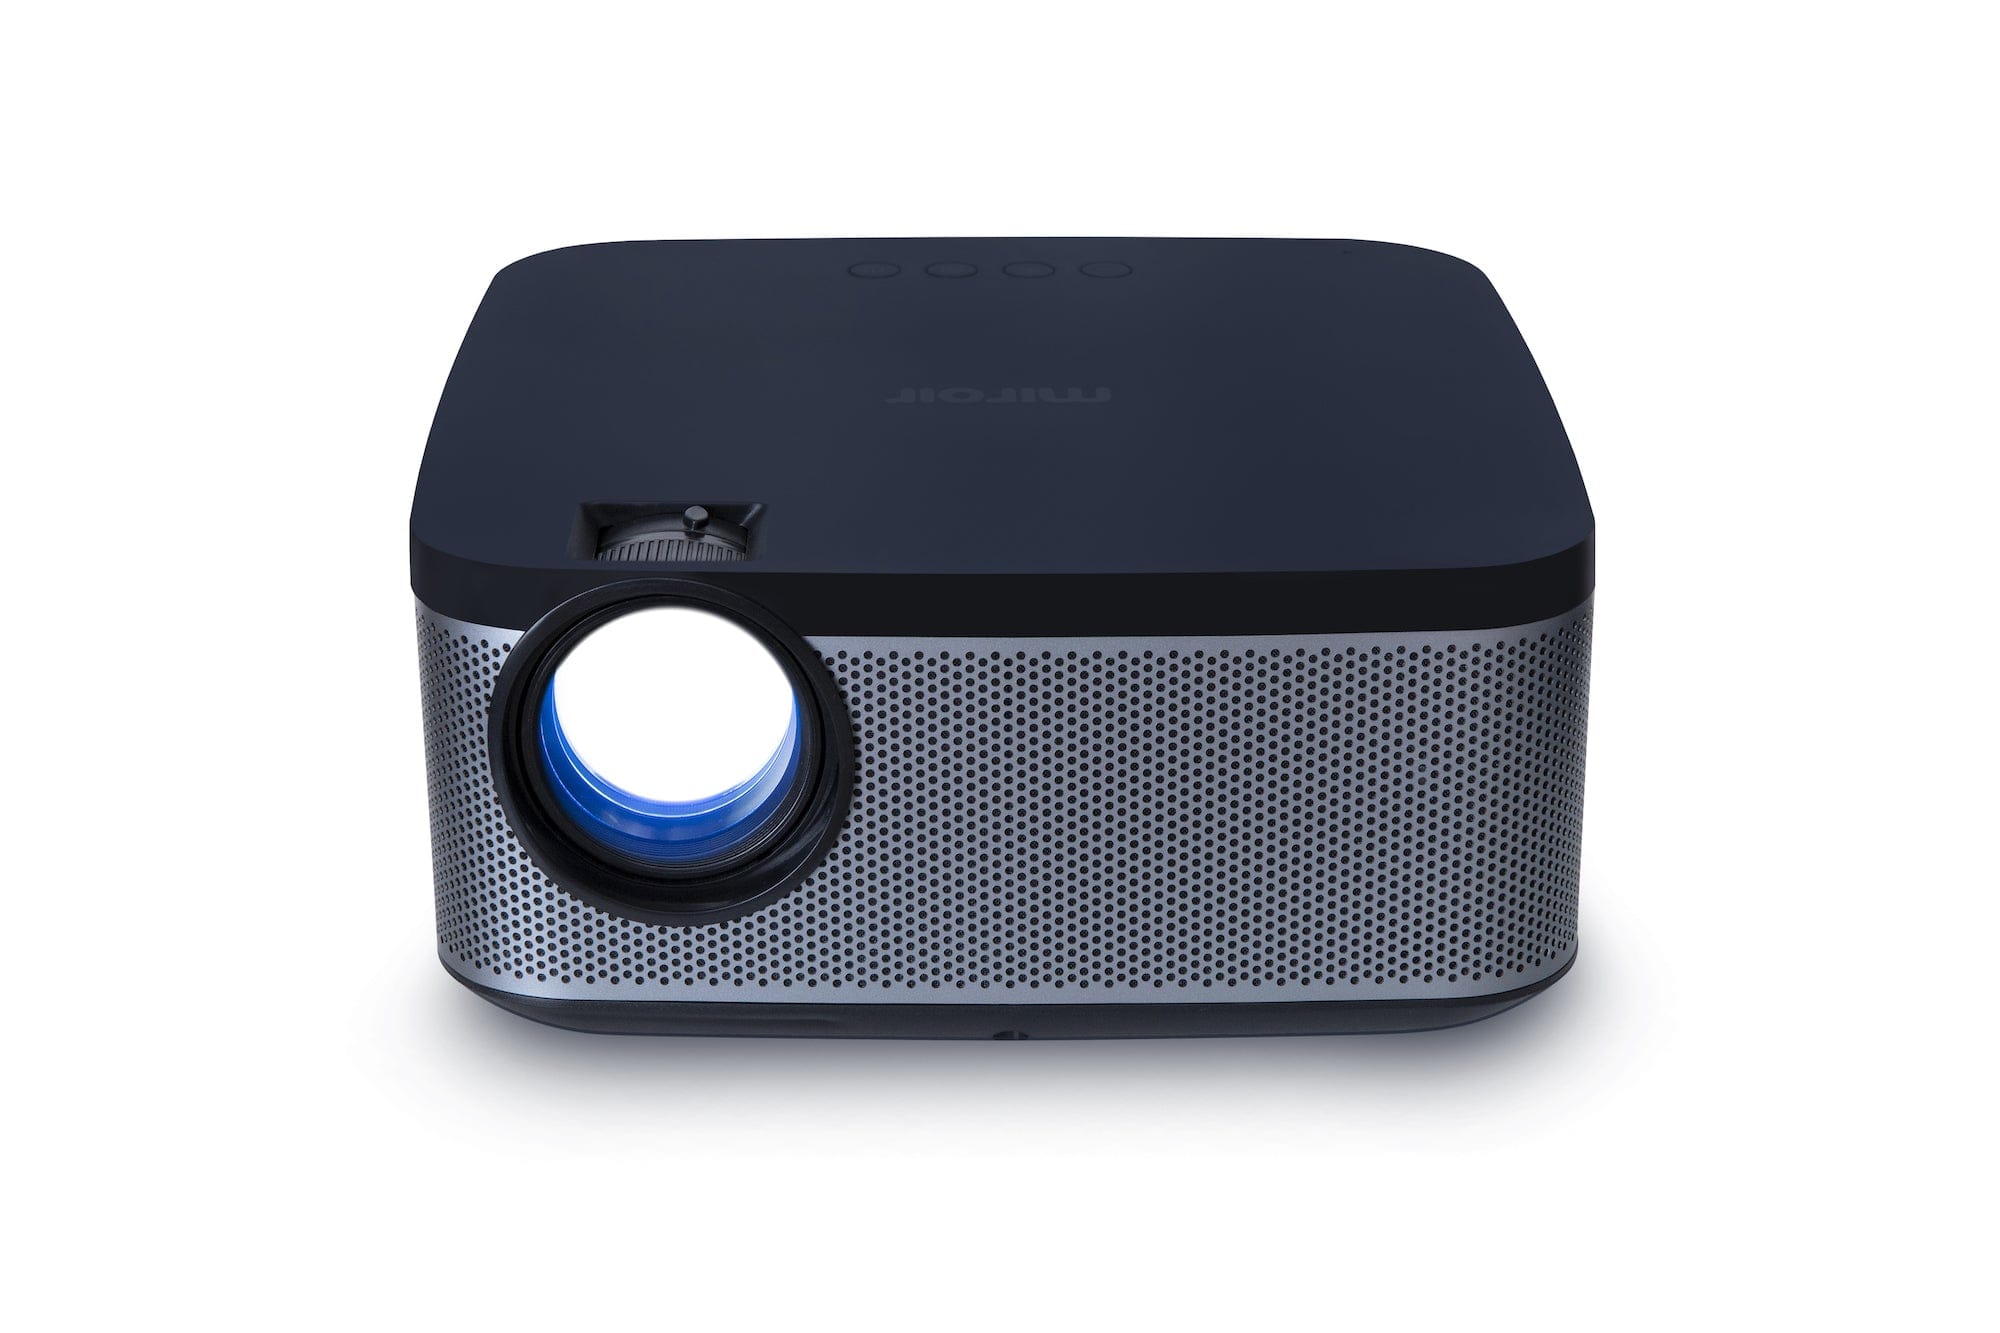 Miroir L300 Full HD Portable LCD Projector, experience stunning visuals with 1080p native resolution, a built-in speaker, an LED lamp, & 2 HDMI inputs. Upgrade your entertainment game!